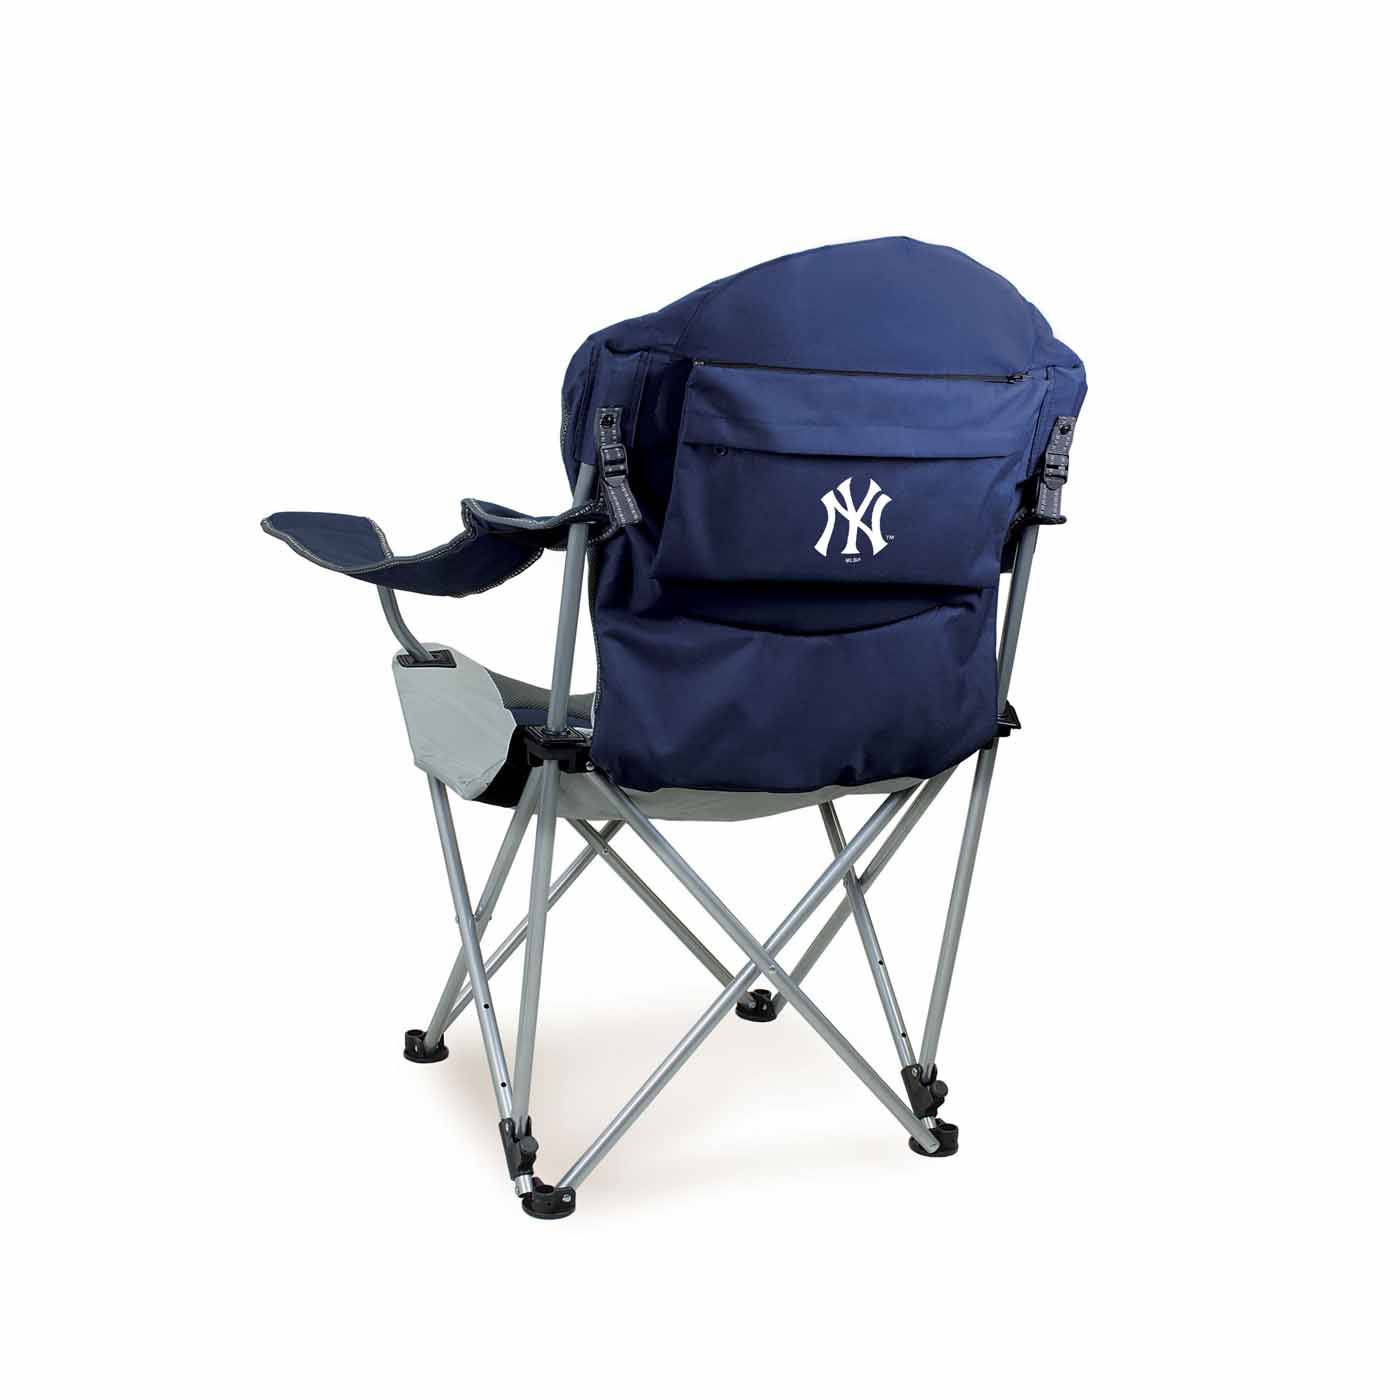 Unique New York Yankees Beach Chair for Small Space